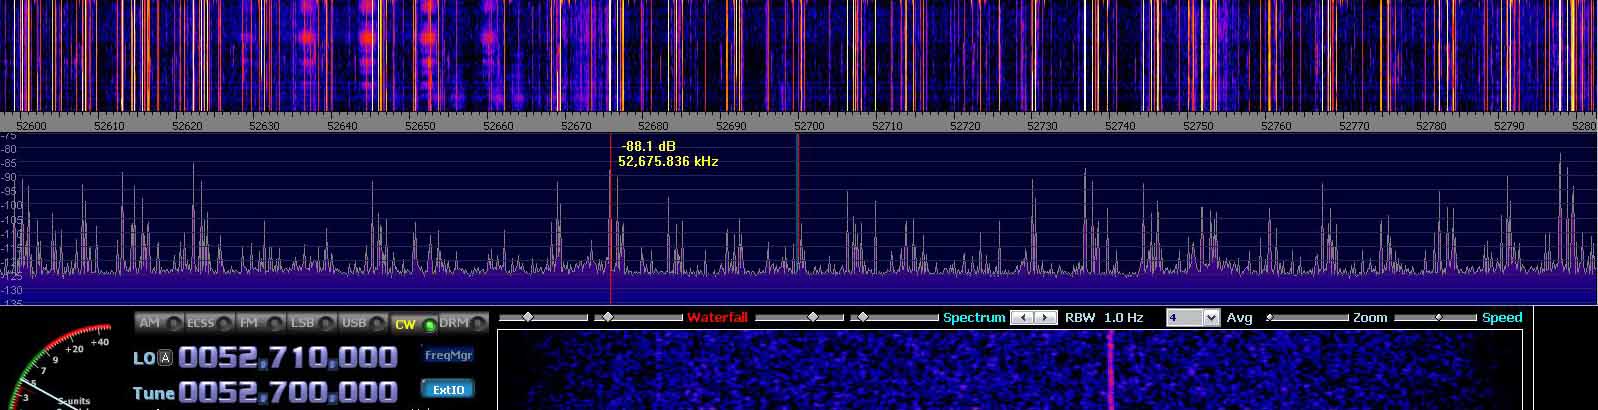 2014-07-04 52.700 MHz +- 100 kHz - Strong Es - 4-el dipole array with ends to St P - (c) OH7HJ.JPG